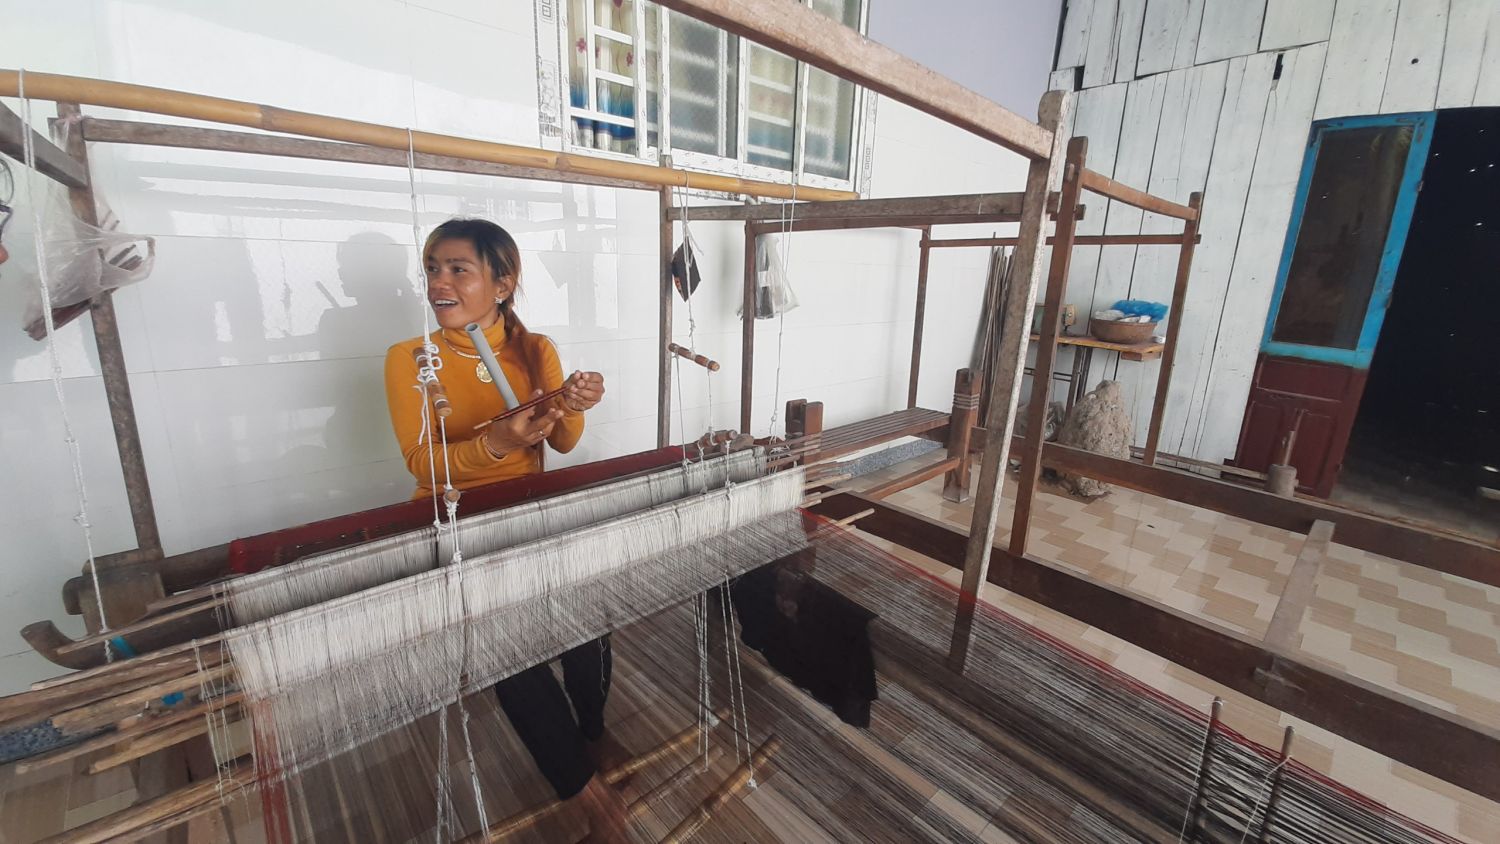 A local women was weaving silk at Van Giao craft village in Tinh Bien, An Giang Province